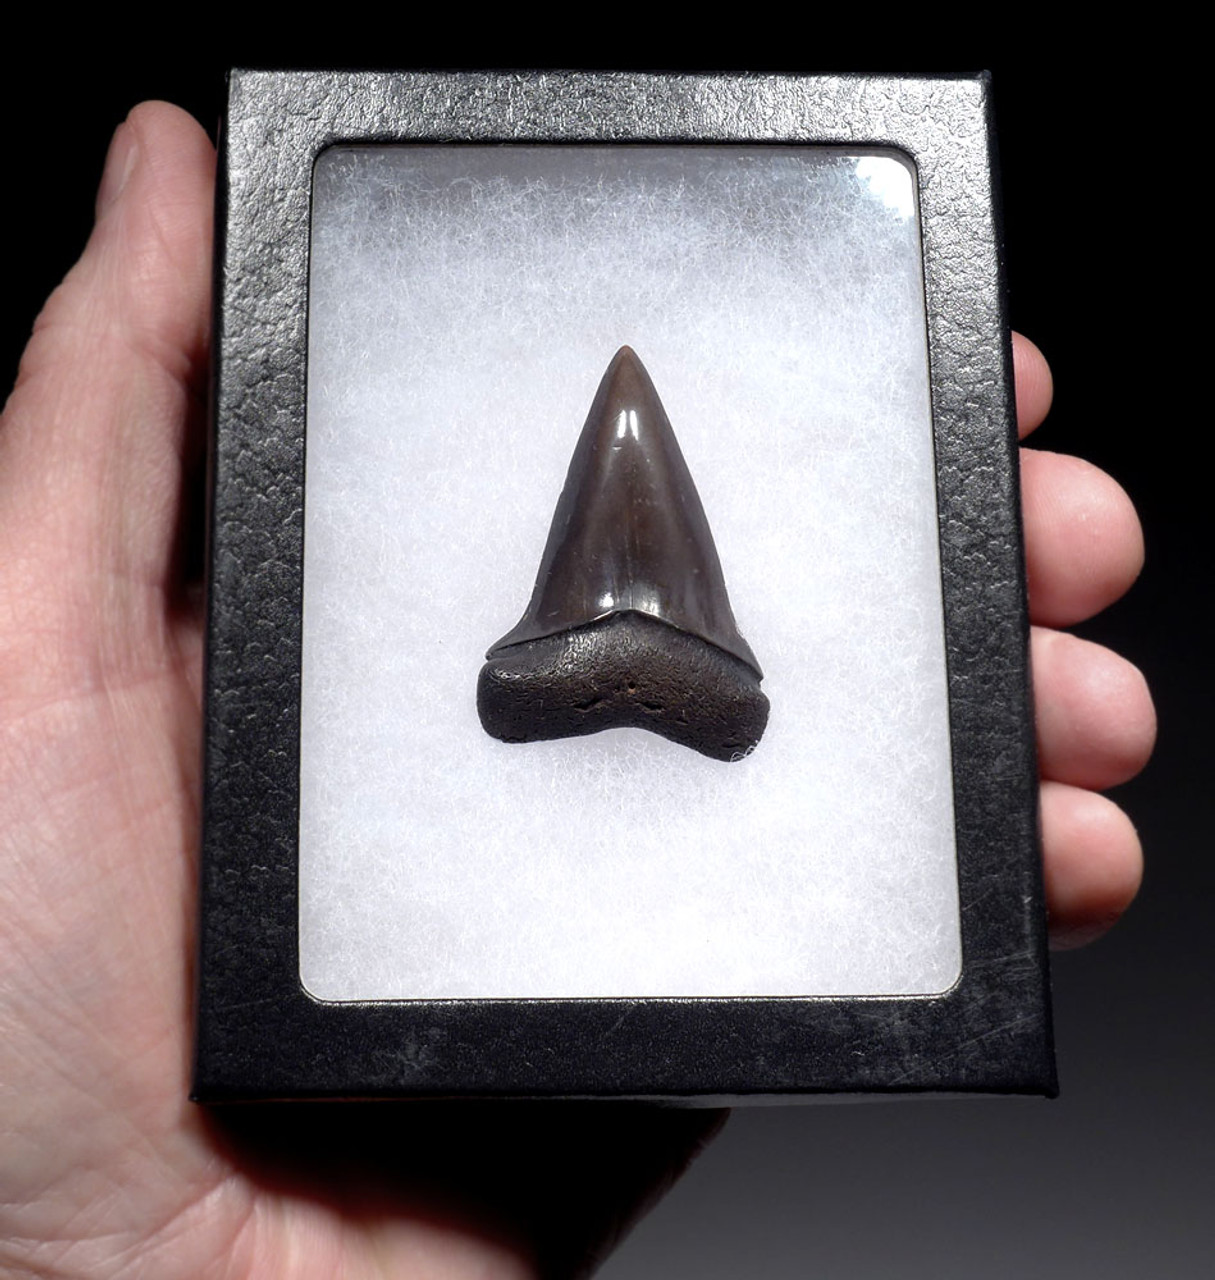 SUPERB 1.8 INCH USA FOSSIL SHARK TOOTH OF ISURUS HASTALIS BROAD TOOTH MAKO WITH CHATOYANT BRONZE ENAMEL  *SHX163